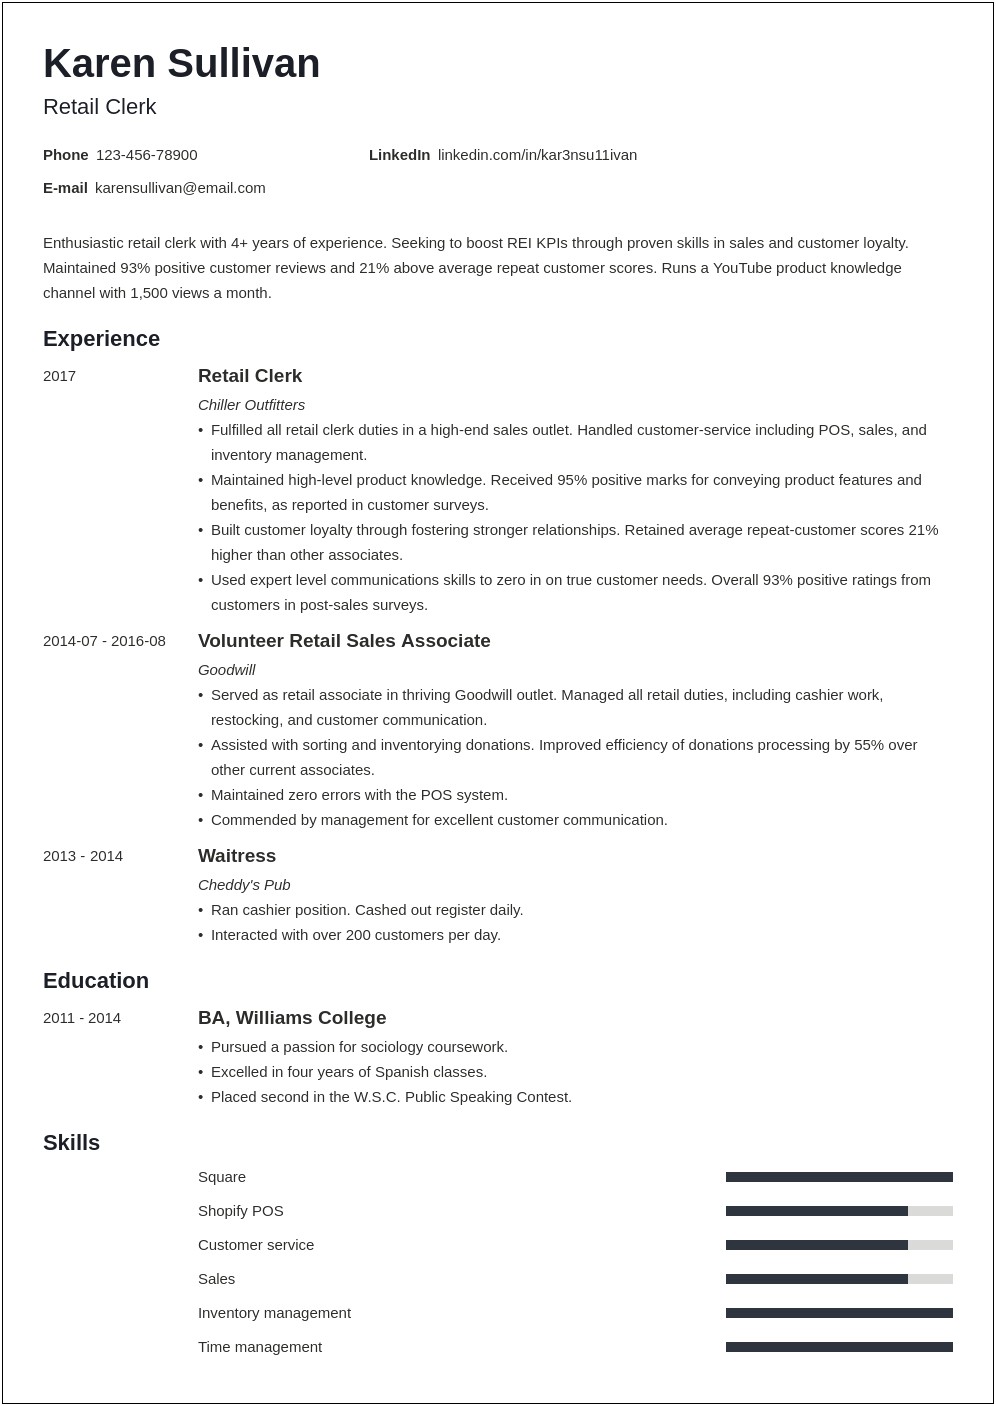 Resume Objective Statement Examples For Retail